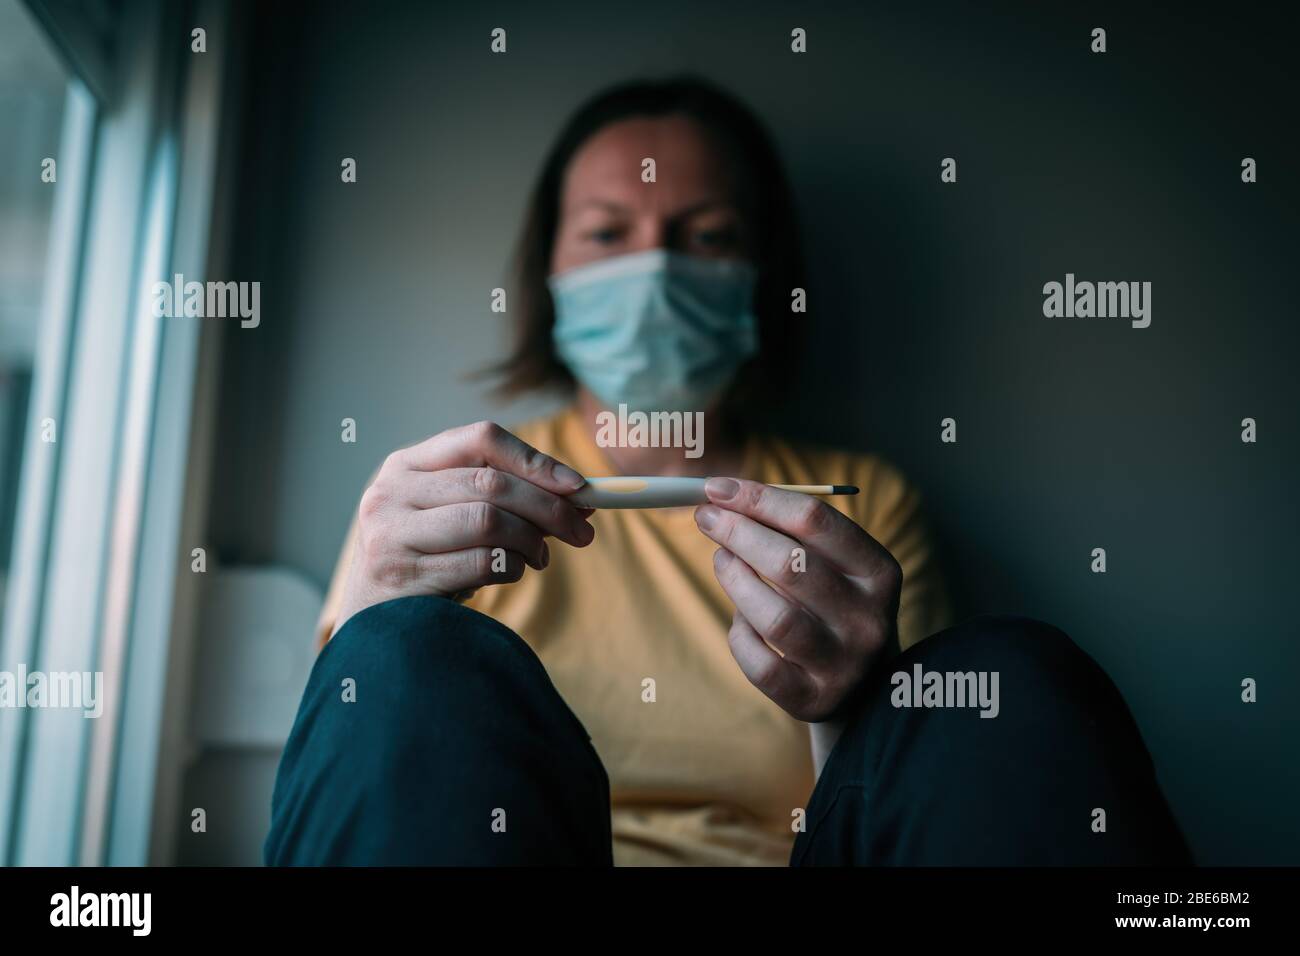 Woman in self-isolation measuring body temperature electronic digital thermometer. Female person with face protective respiratory mask, selective focu Stock Photo